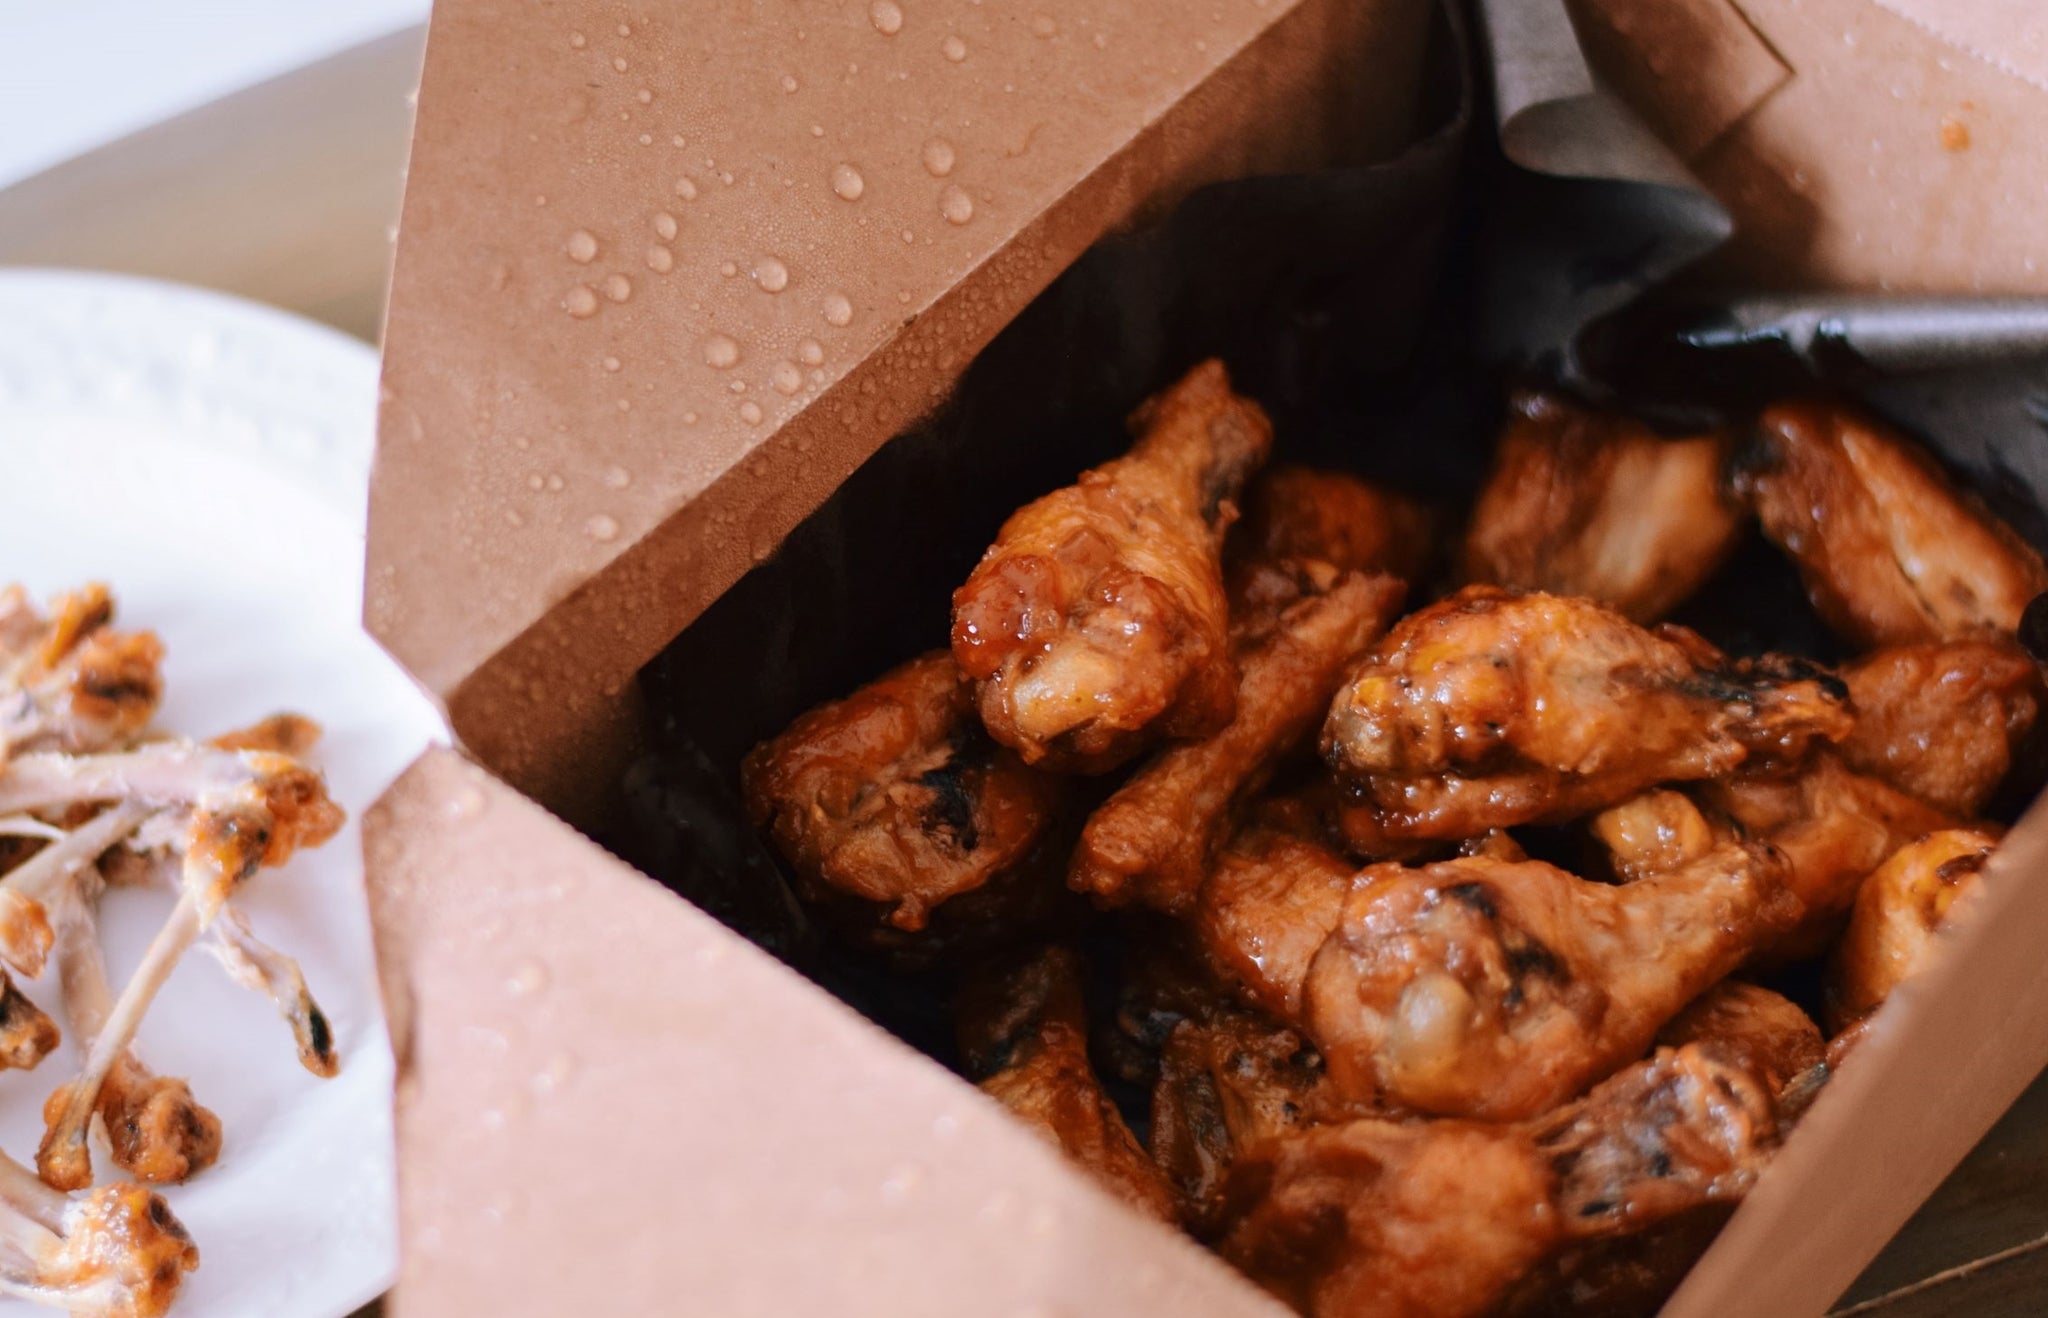 https://cdn.shopify.com/s/files/1/0587/5721/8513/files/chicken-wings-in-a-take-out-container-with-leftove-2022-11-14-05-57-17-utcz_2048x2048.jpg?v=1679319538